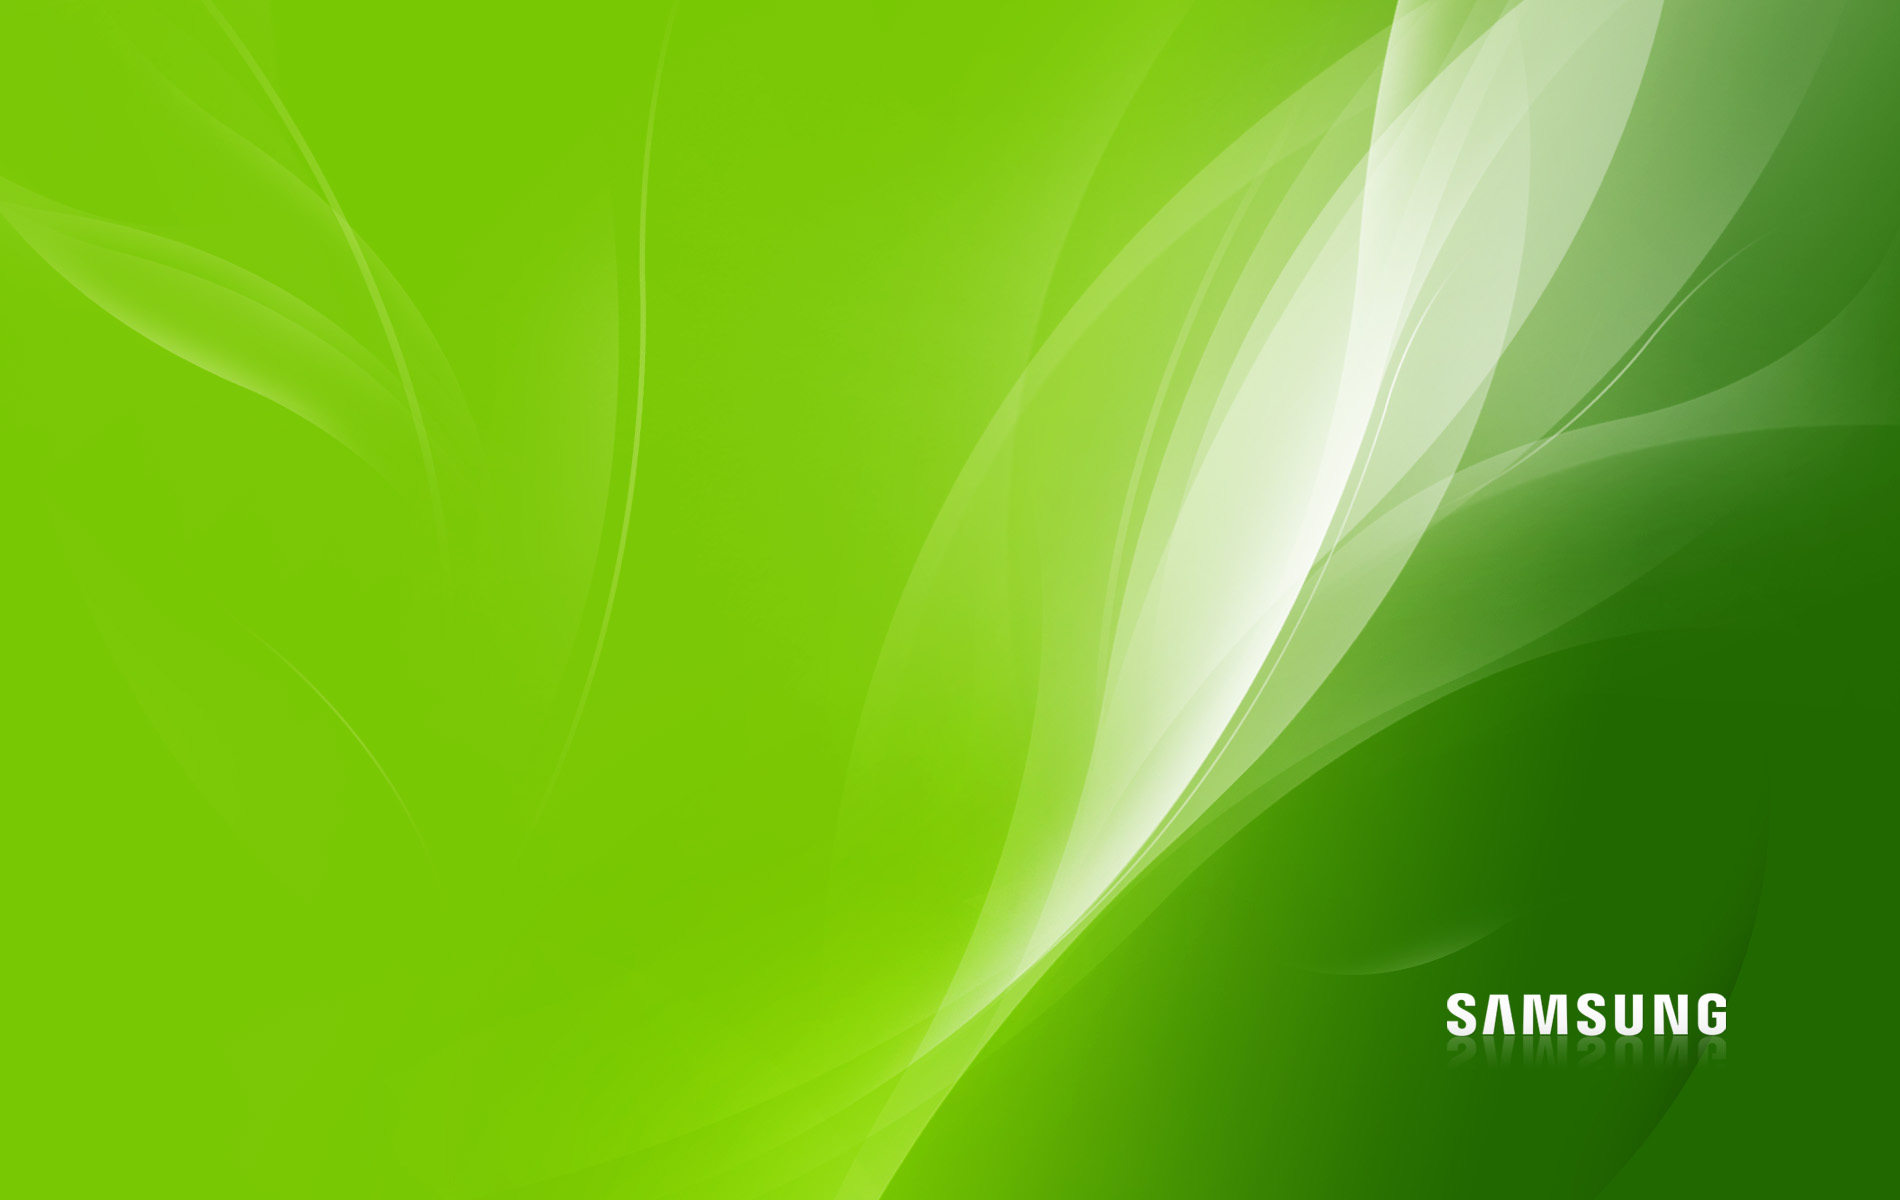 Samsung Wallpapers PC Doctor Ardee